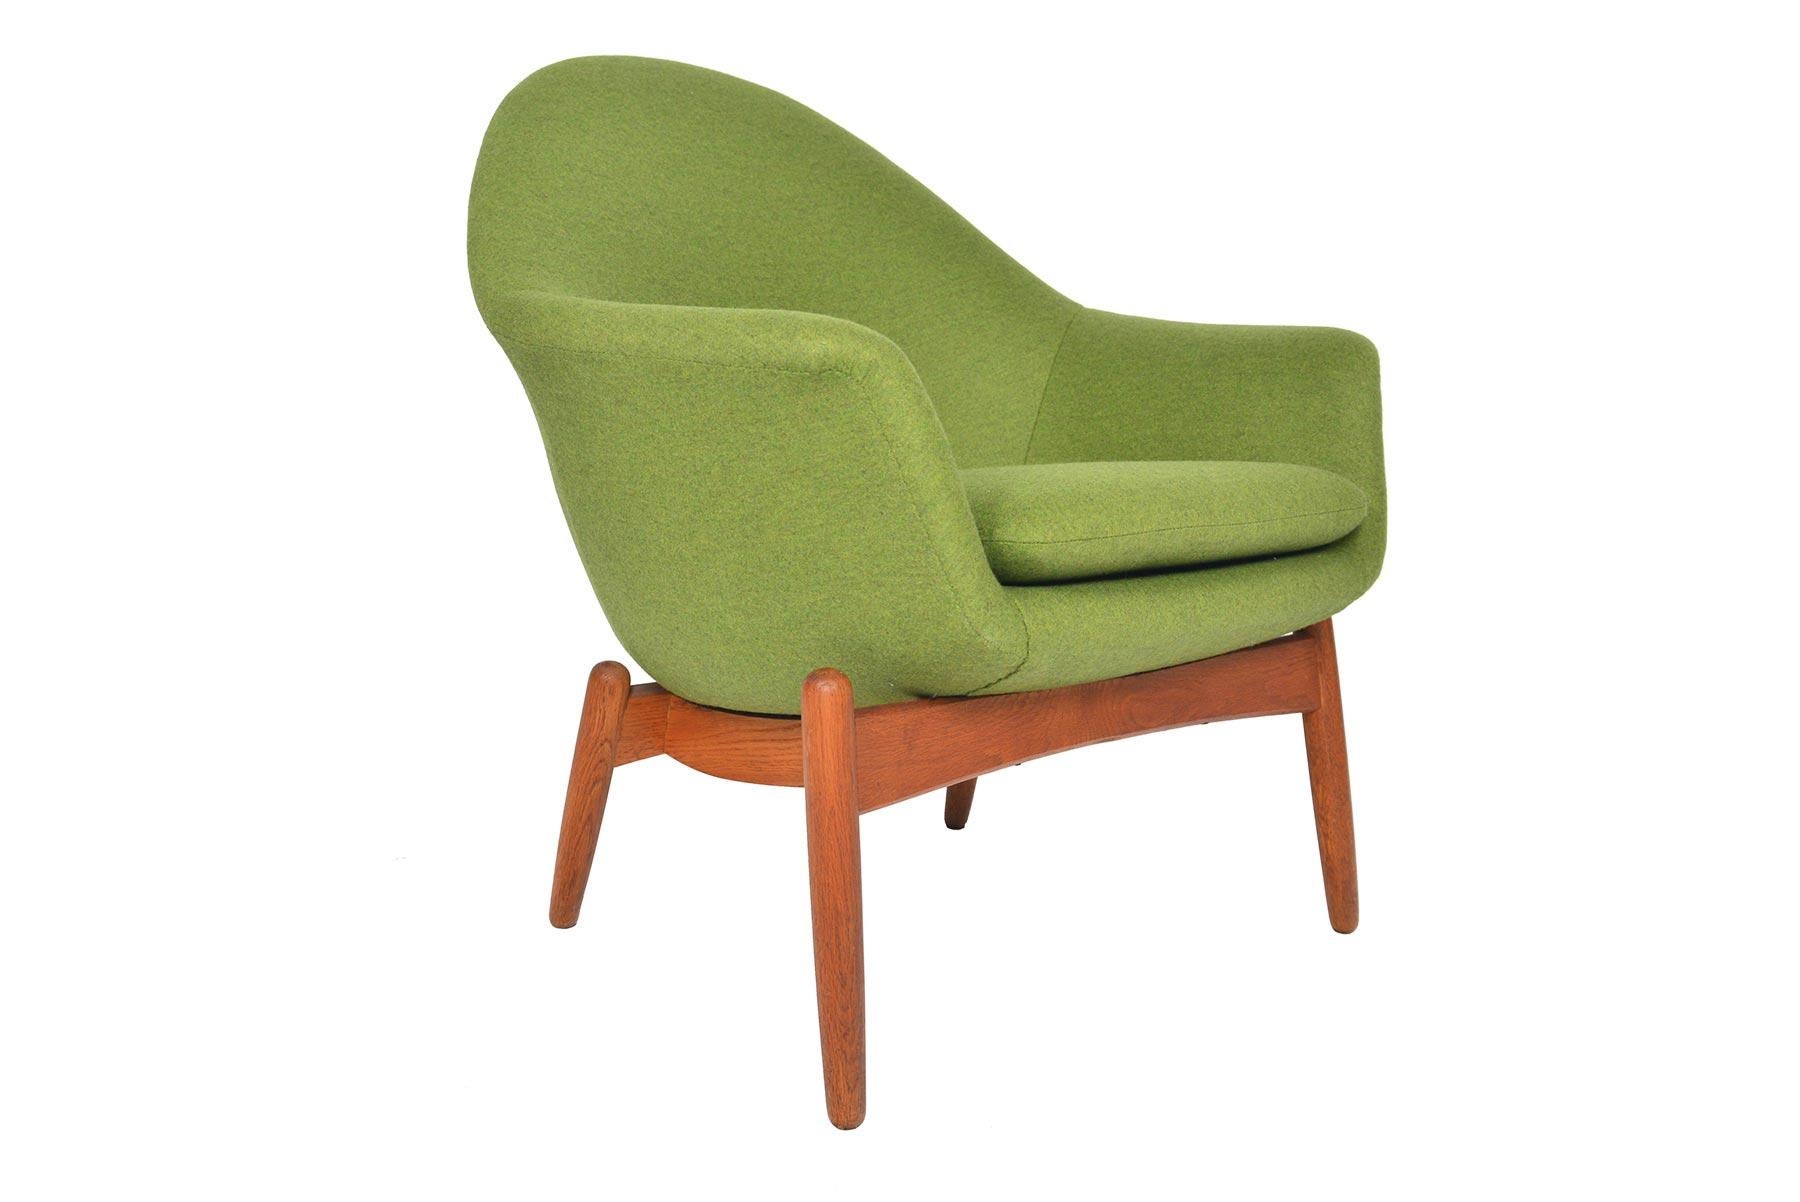 This beautiful Swedish Mid-Century Modern oak lounge chair was designed and produced in the 1960s by Scapa. This lovely curvaceous design offers a striking organic silhouette from every angle. Newly upholstered in felted green wool by Kravet. The